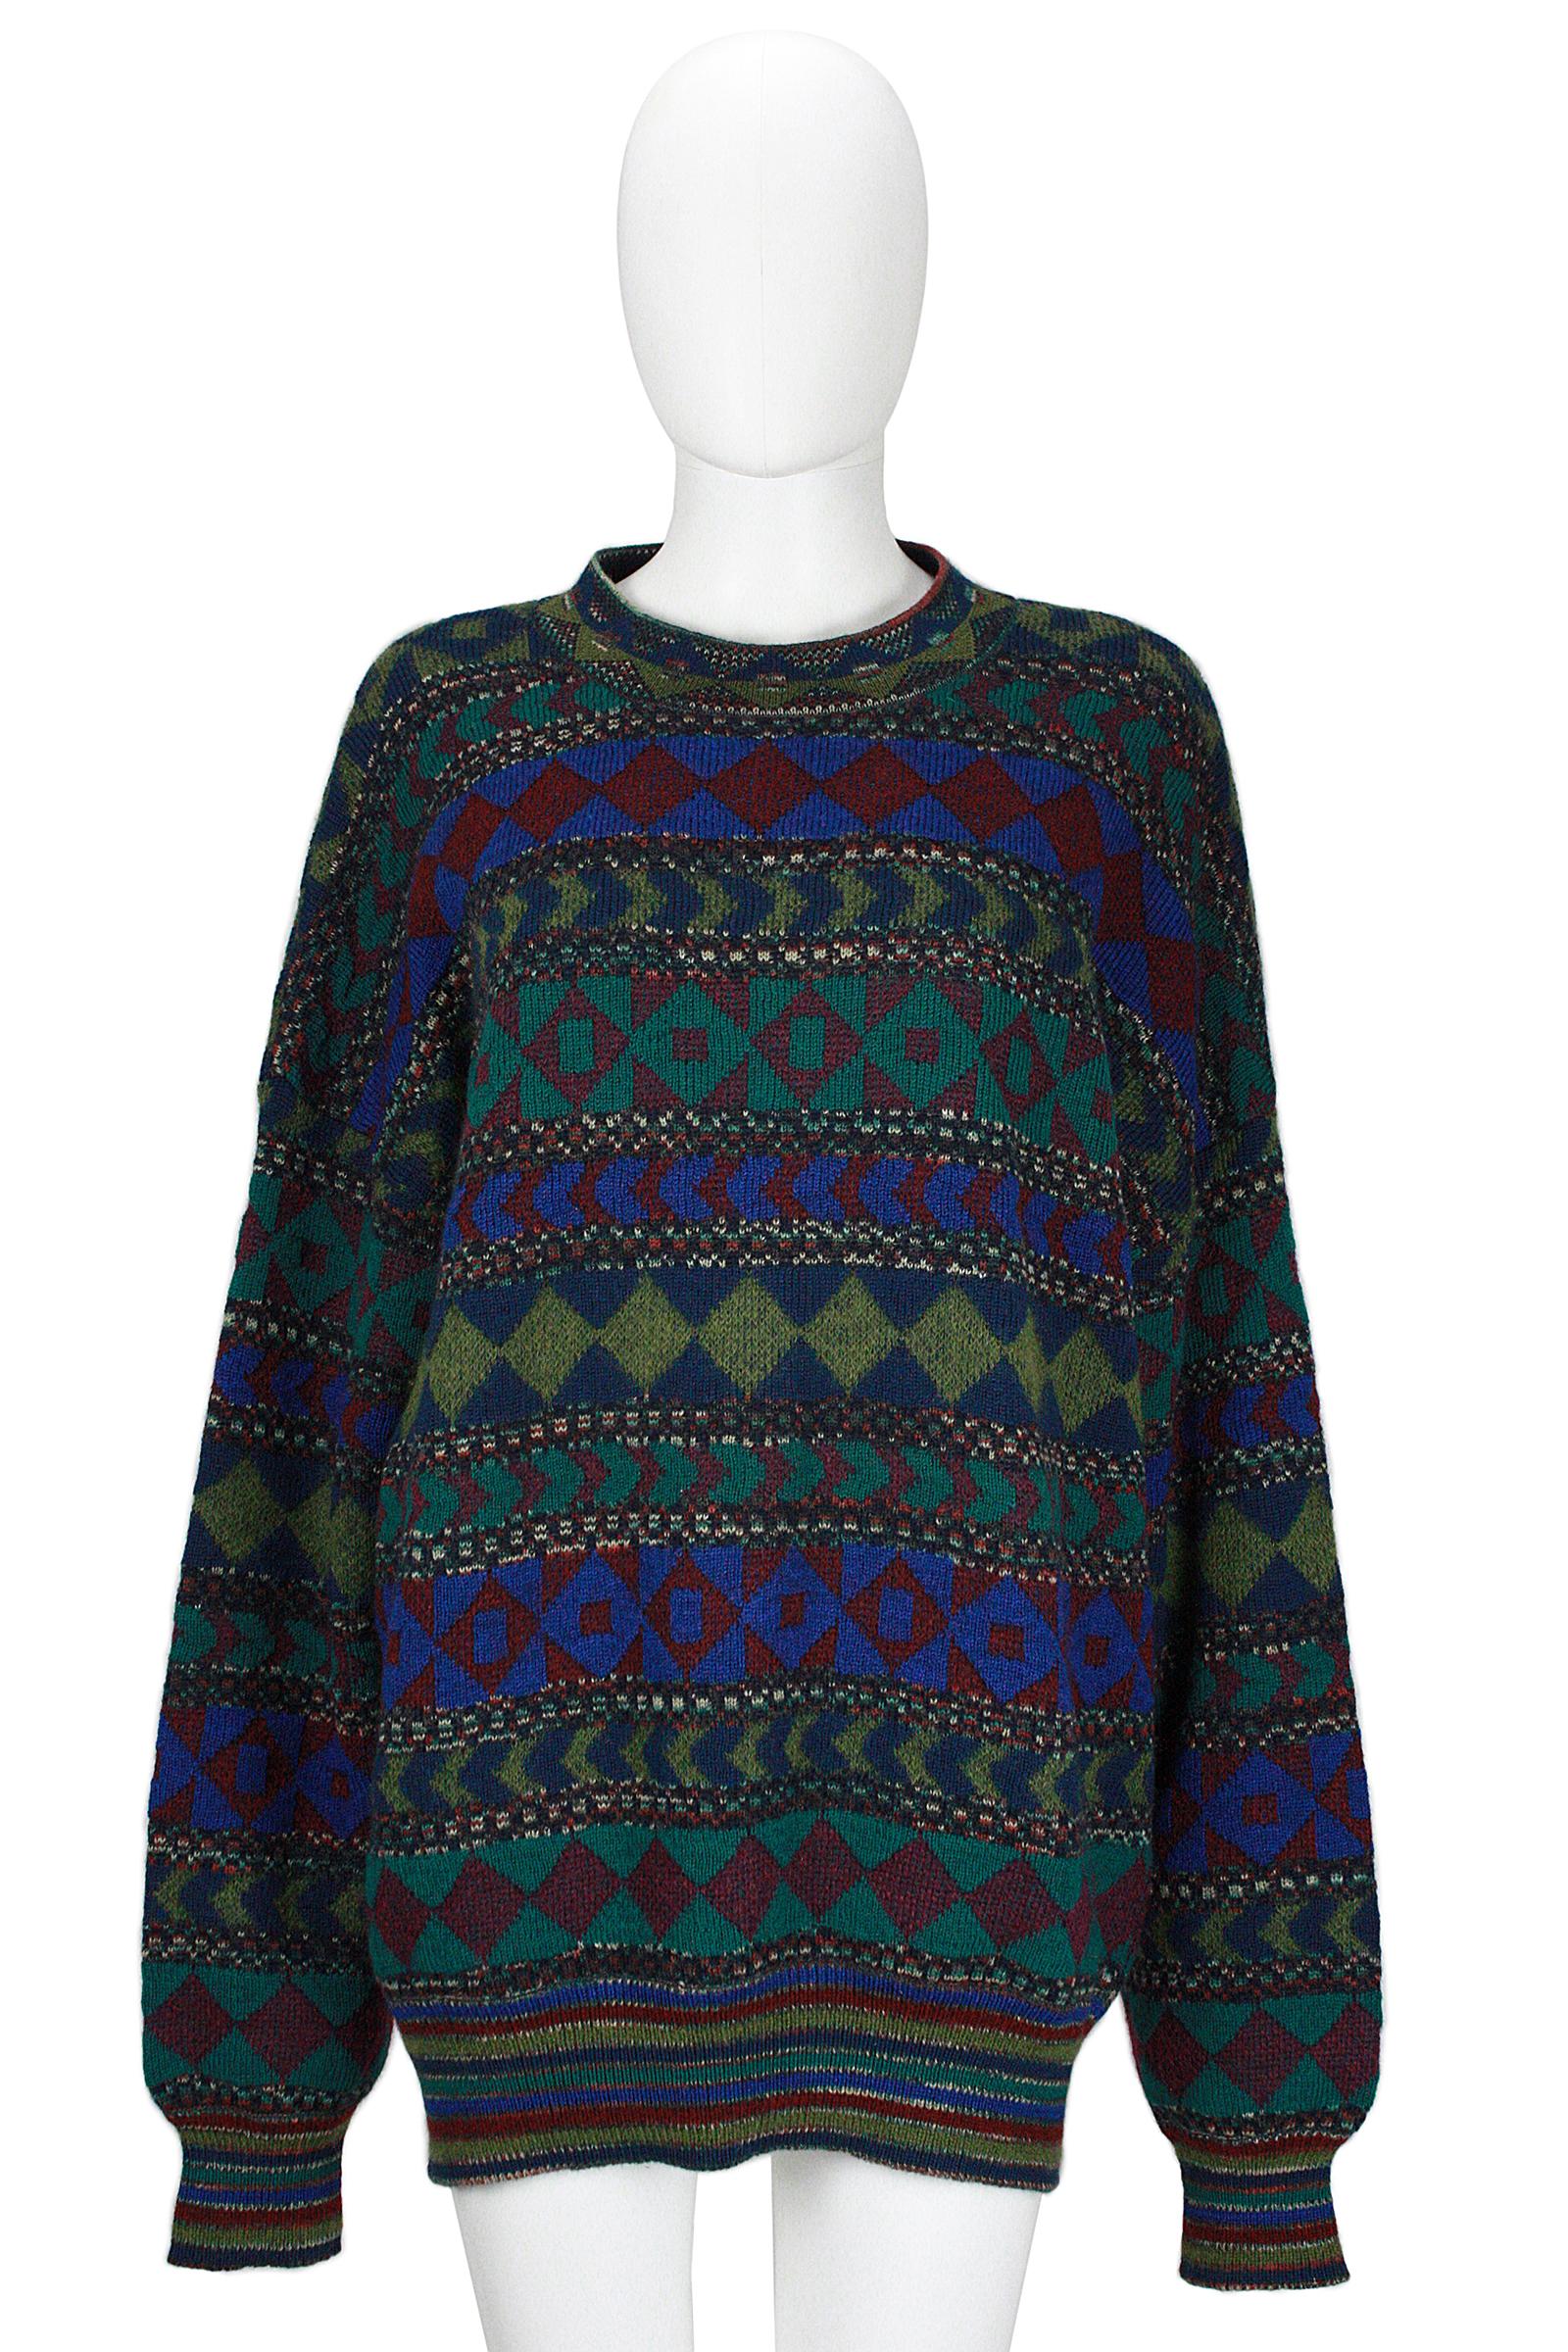 Missoni 
Knit sweater 
Knit stripe trim 
Crew neck 
Soft weave that stretches 
Wool blend
Abstract pattern